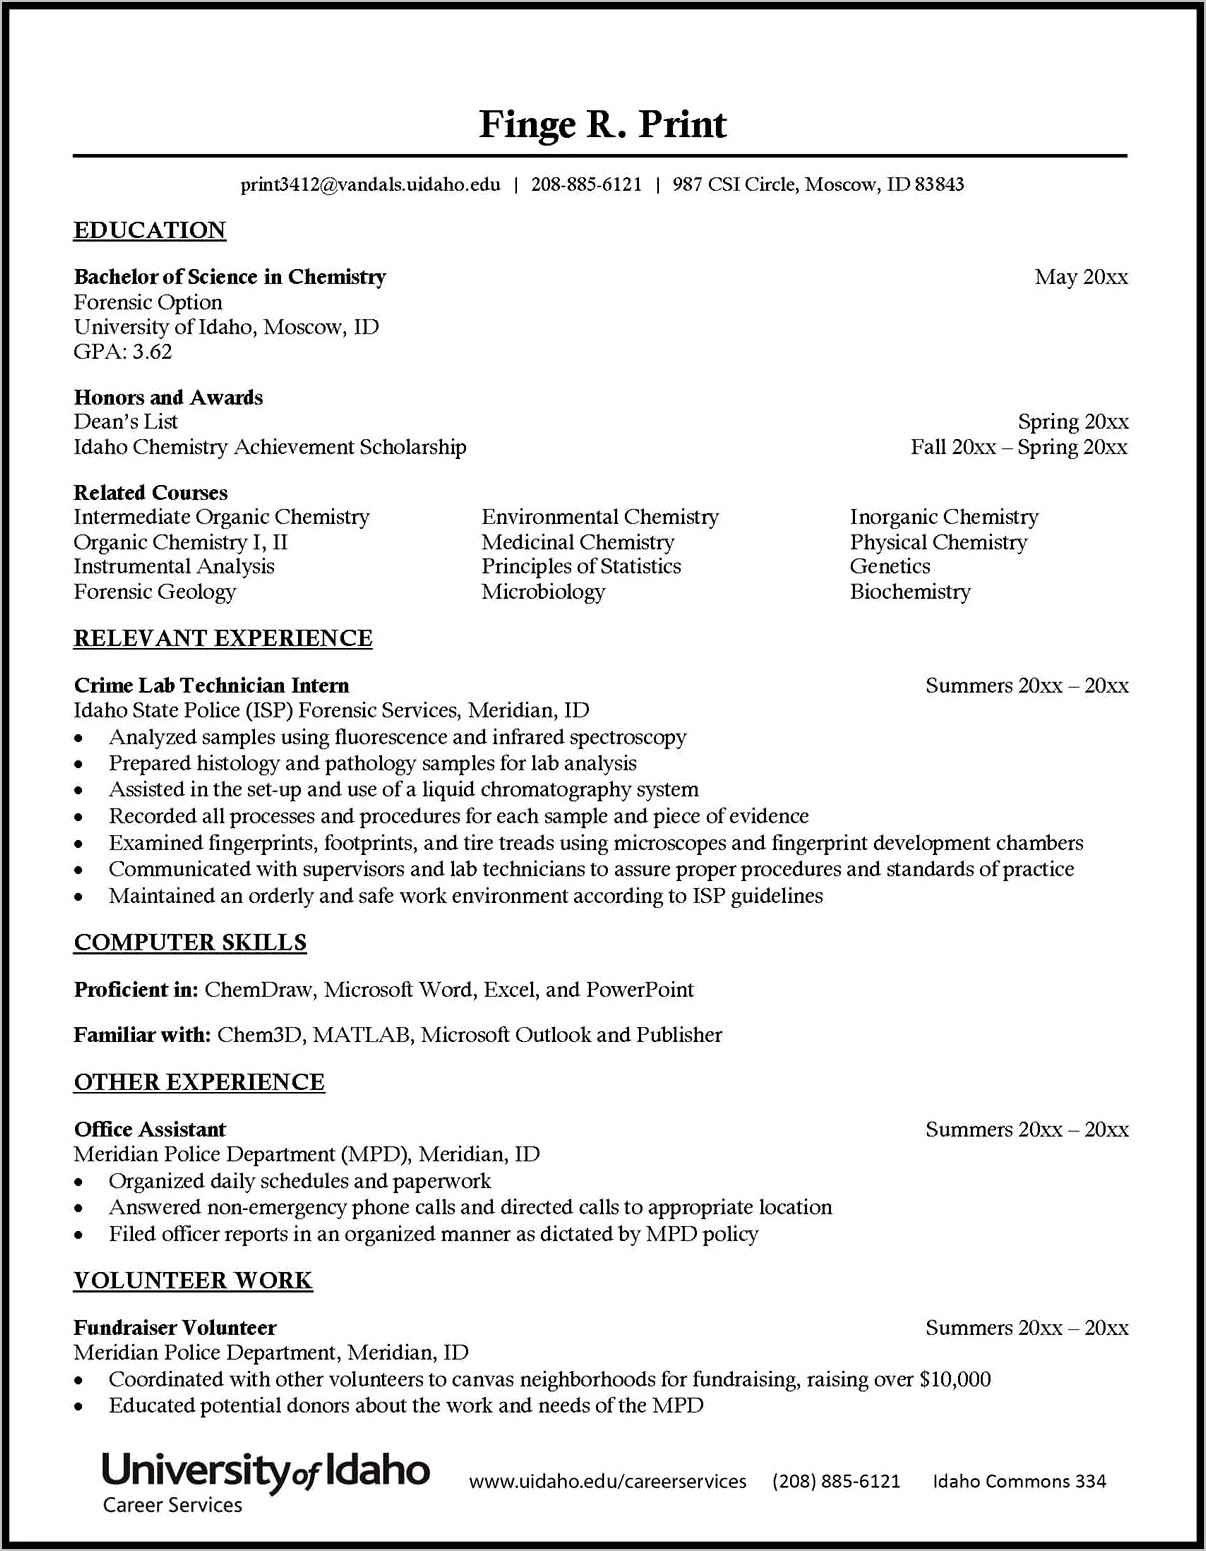 Resume Objective For A Forensic Scientist